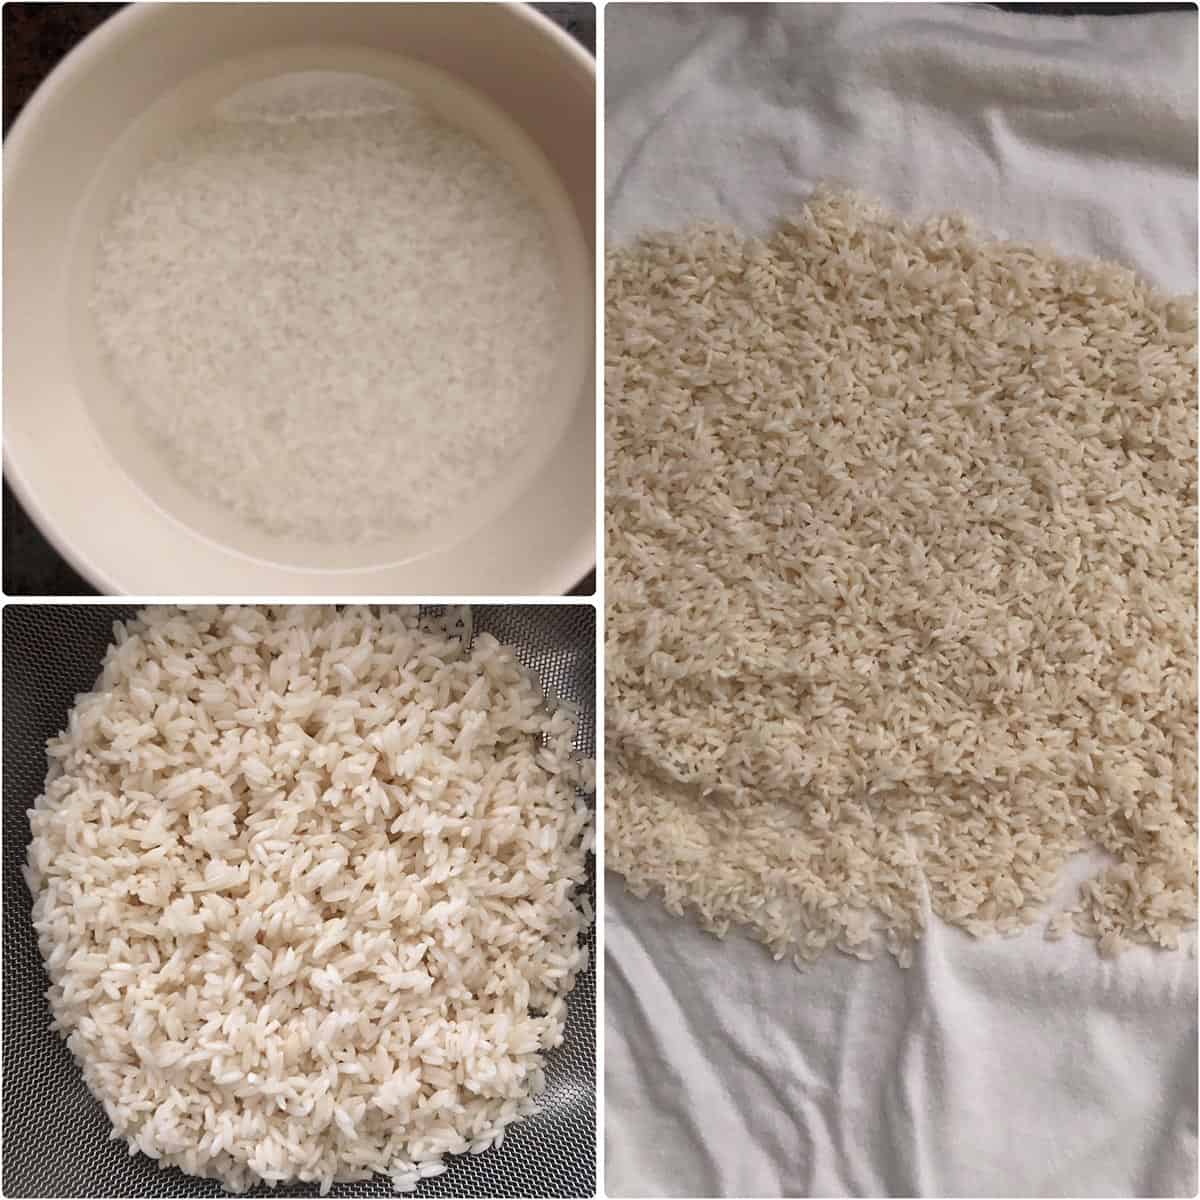 Rice soaked, drained and spread on a kitchen towel